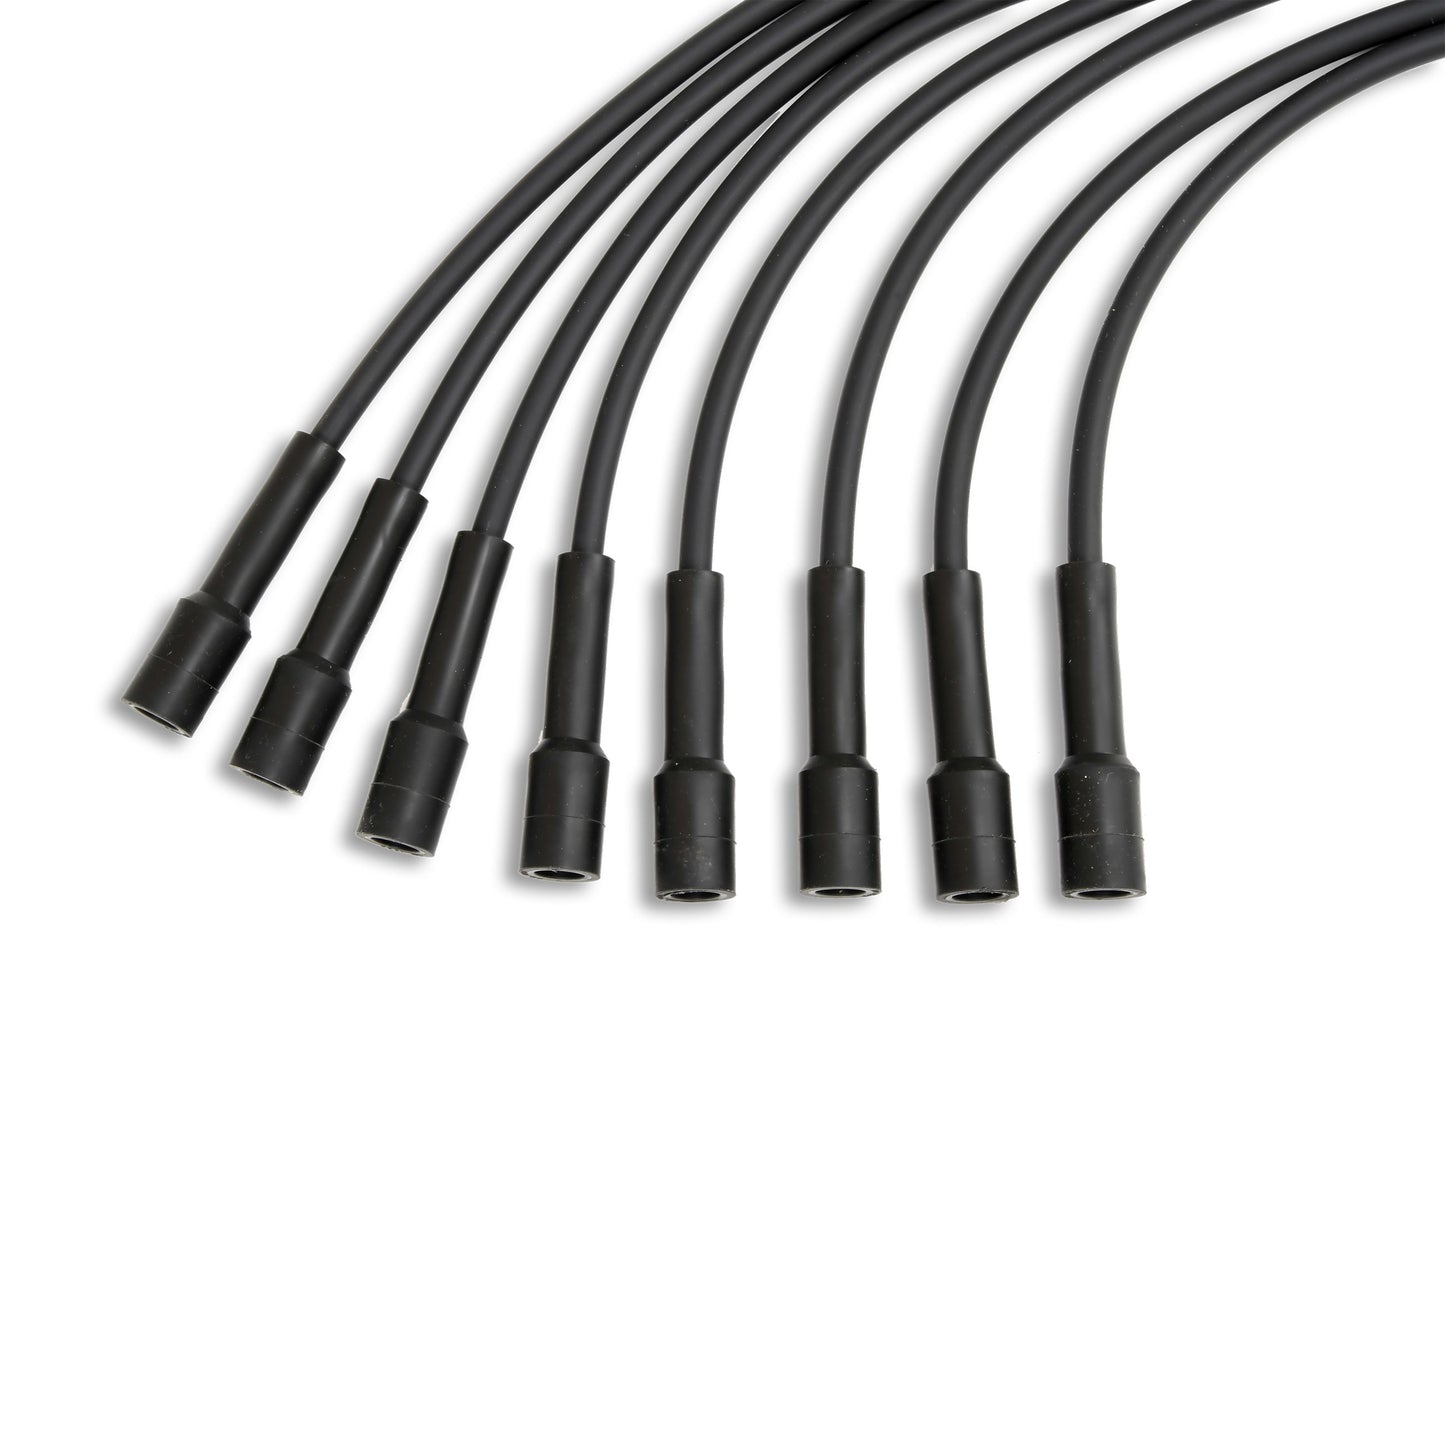 PerTronix 708105 Flame-Thrower Spark Plug Wires 8 cyl Custom Fit Black